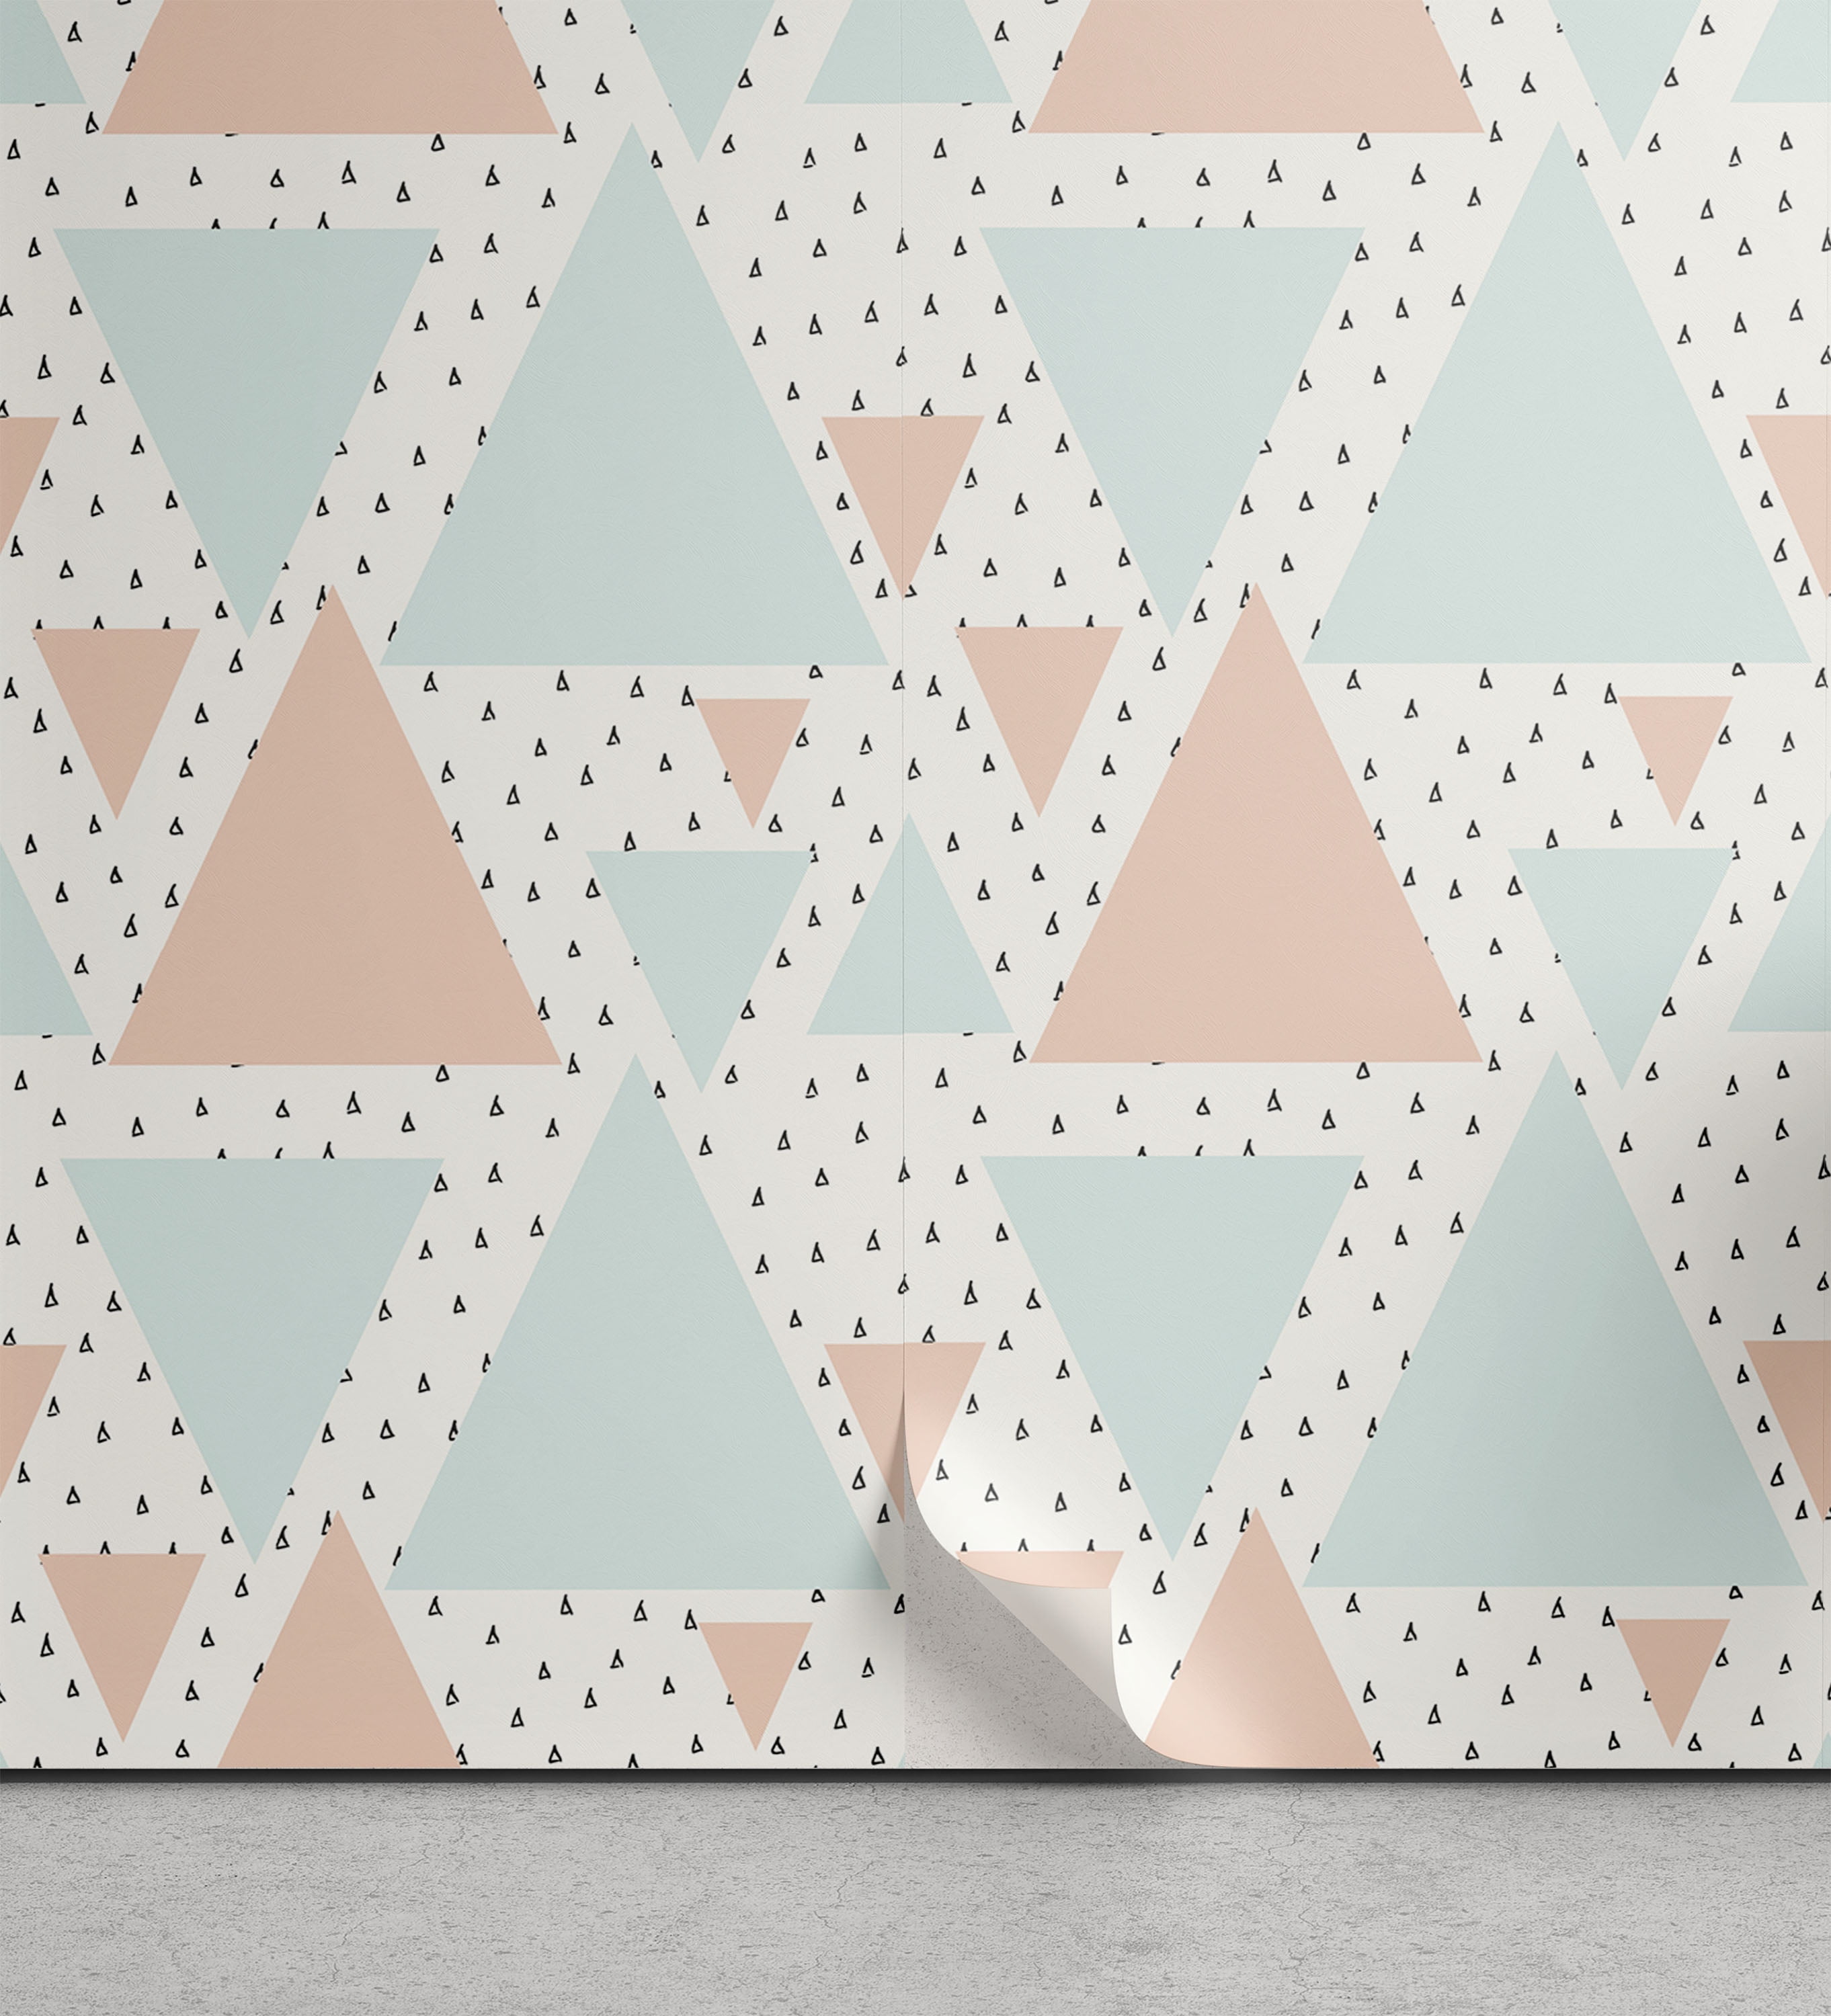 Neutral Color Peel & Stick Wallpaper, Triangles Geometric Hipster  Minimalist Contemporary Art Deco, Self-Adhesive Living Room Kitchen Accent,  3 Sizes, Peach Pale Blue and Coconut, by Ambesonne 